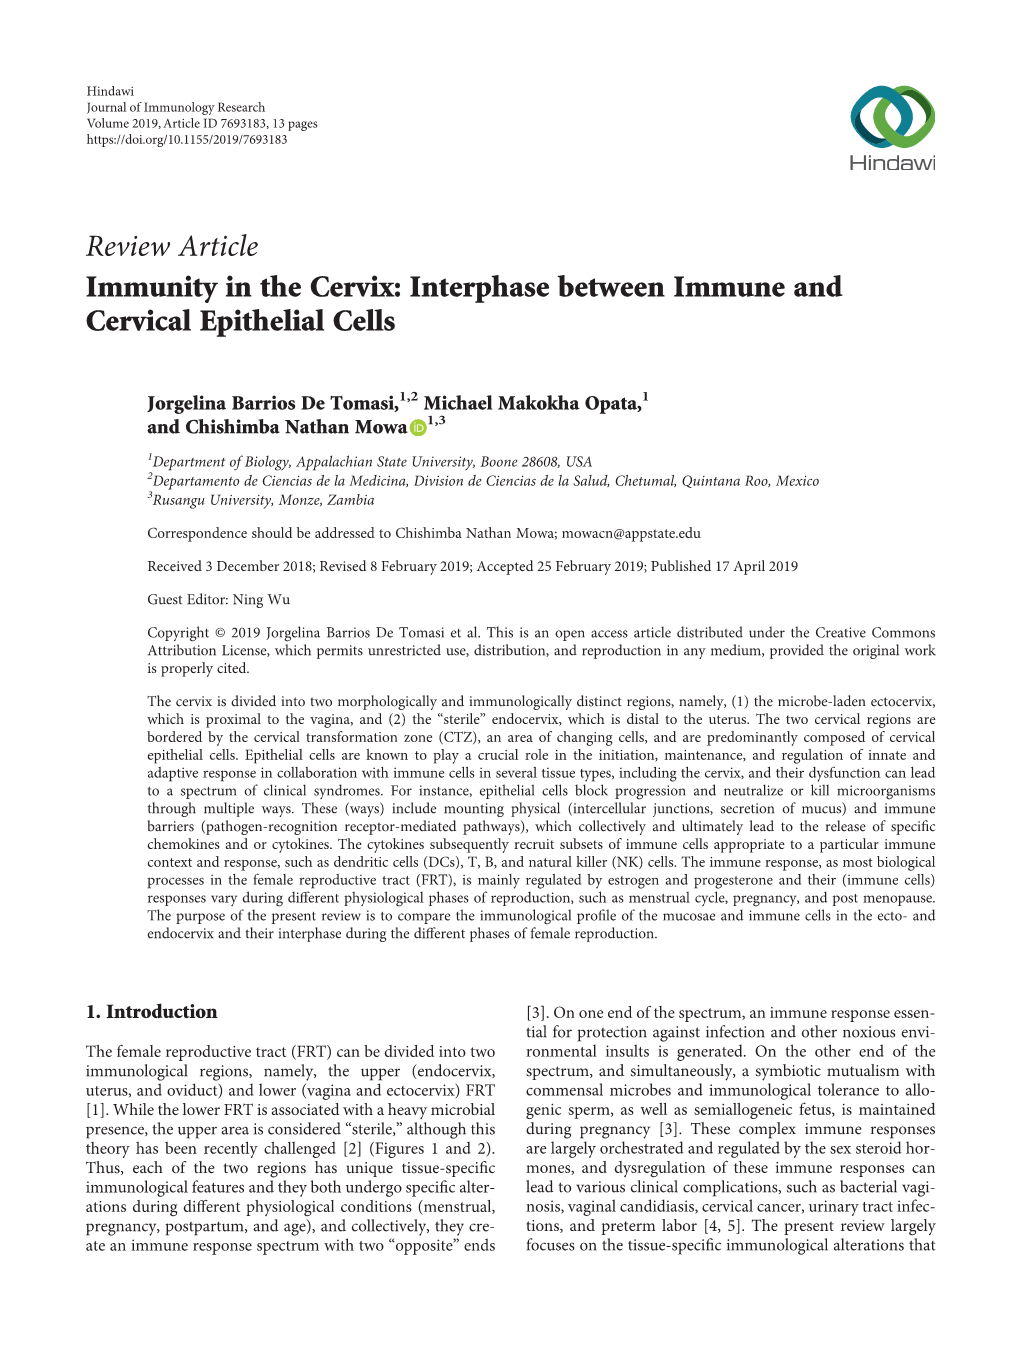 Interphase Between Immune and Cervical Epithelial Cells